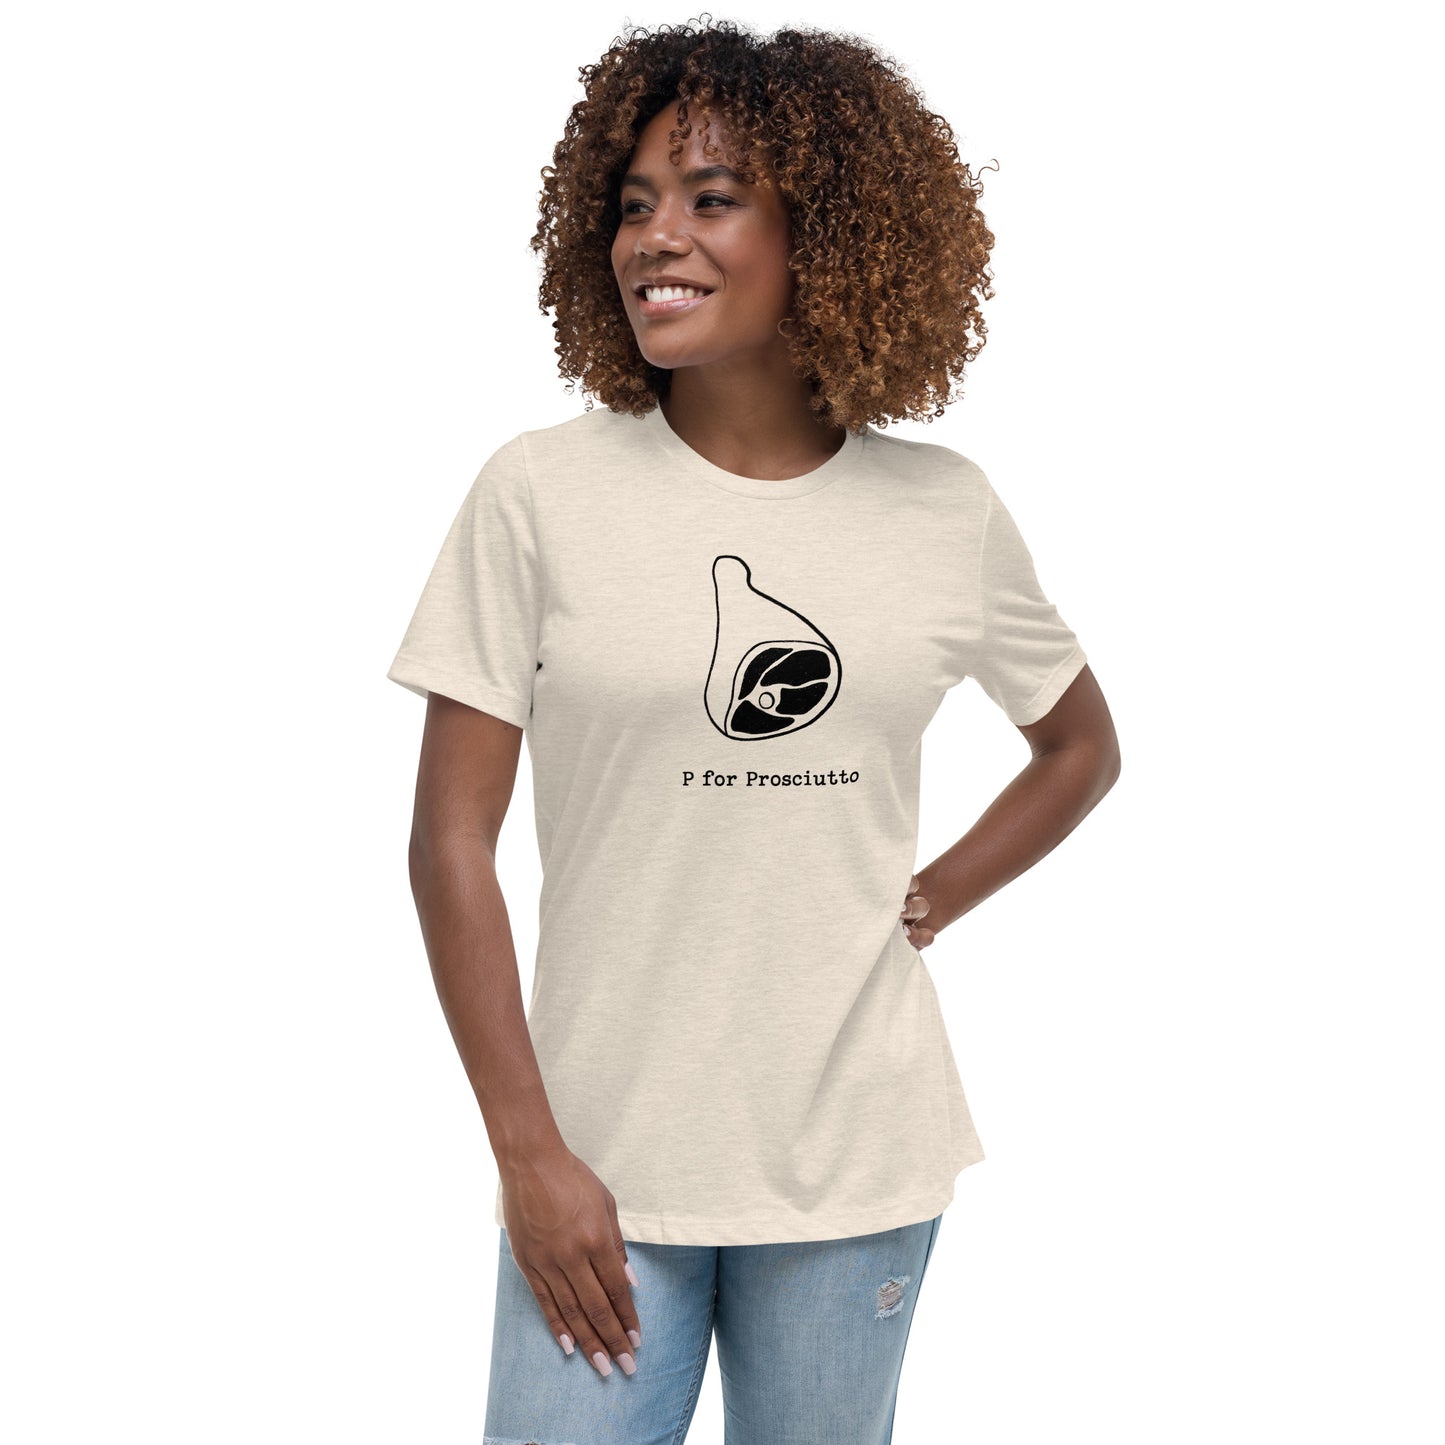 Prosciutto on a Women's Relaxed T-Shirt